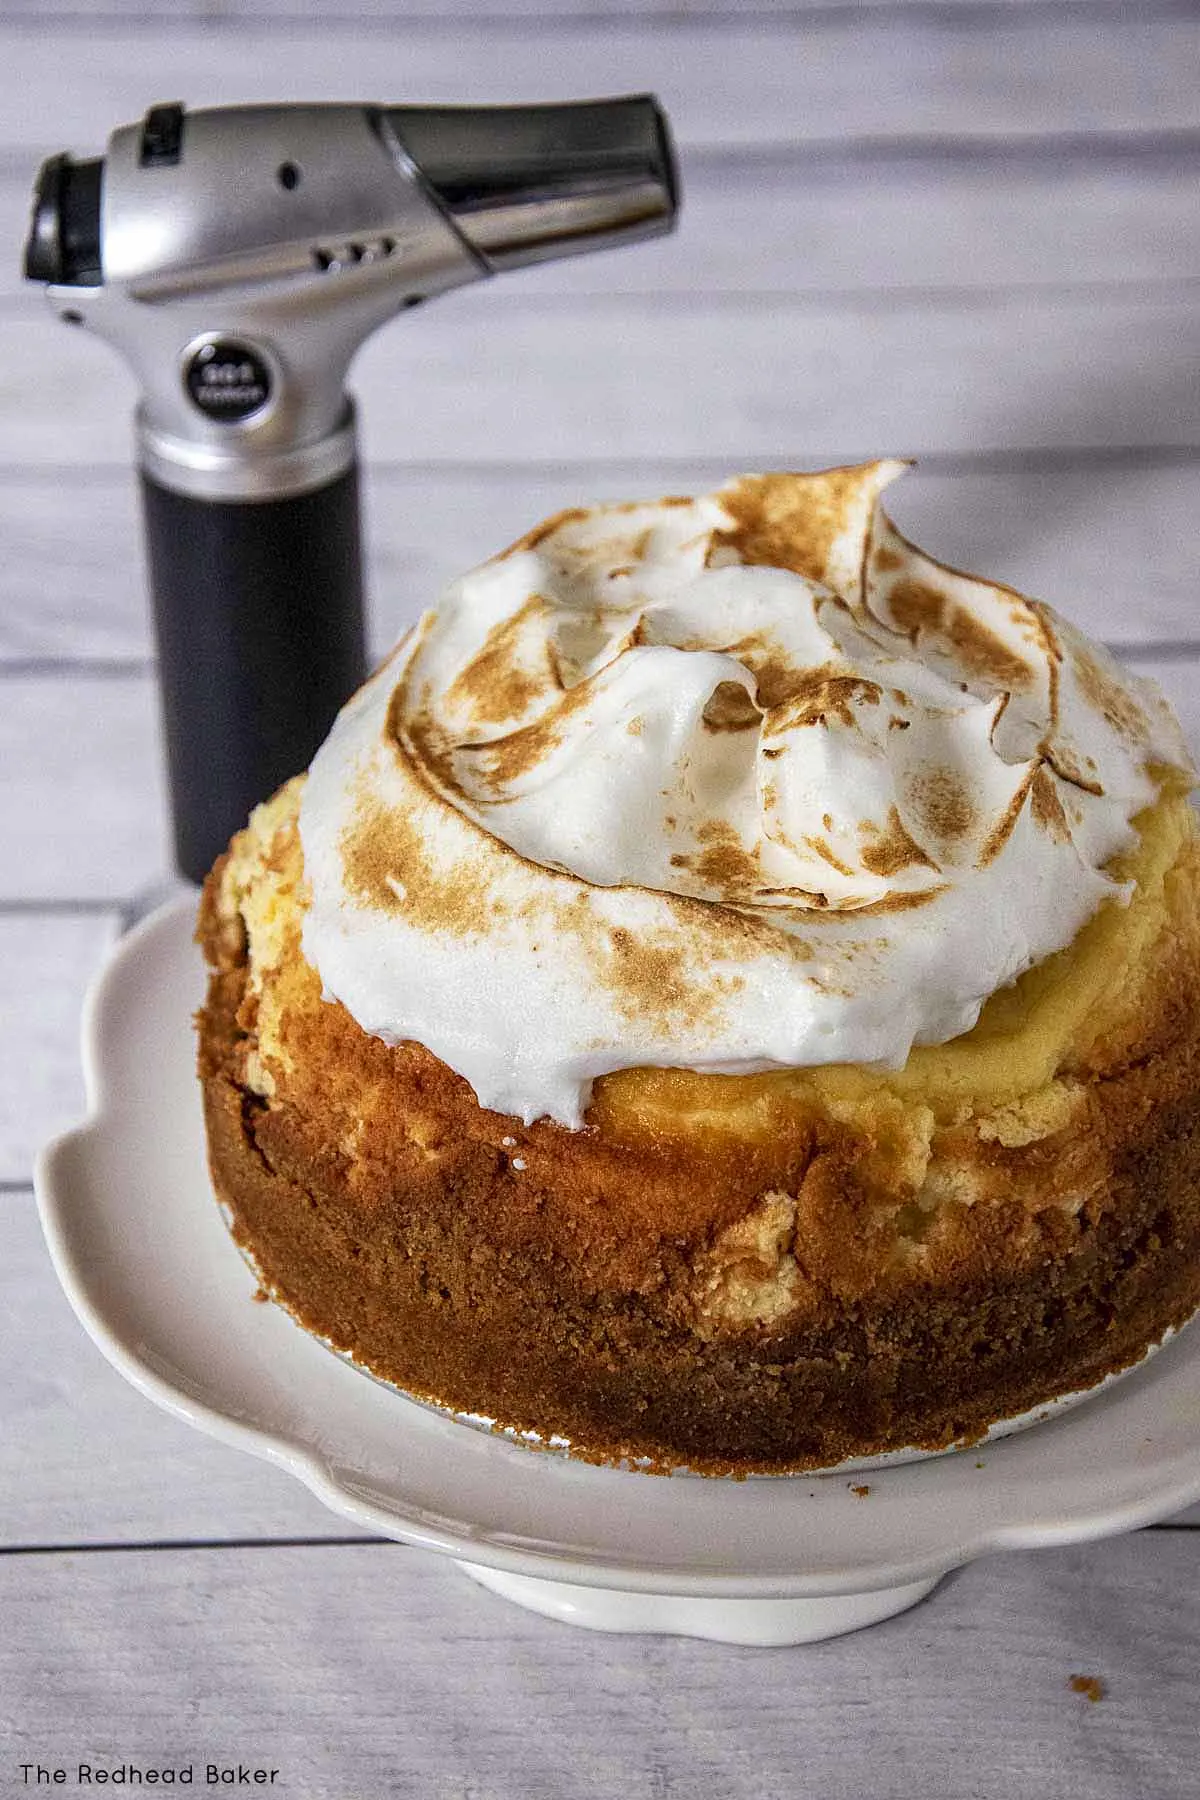 A lemon meringue cheesecake with toasted meringue in front of a butane kitchen torch.